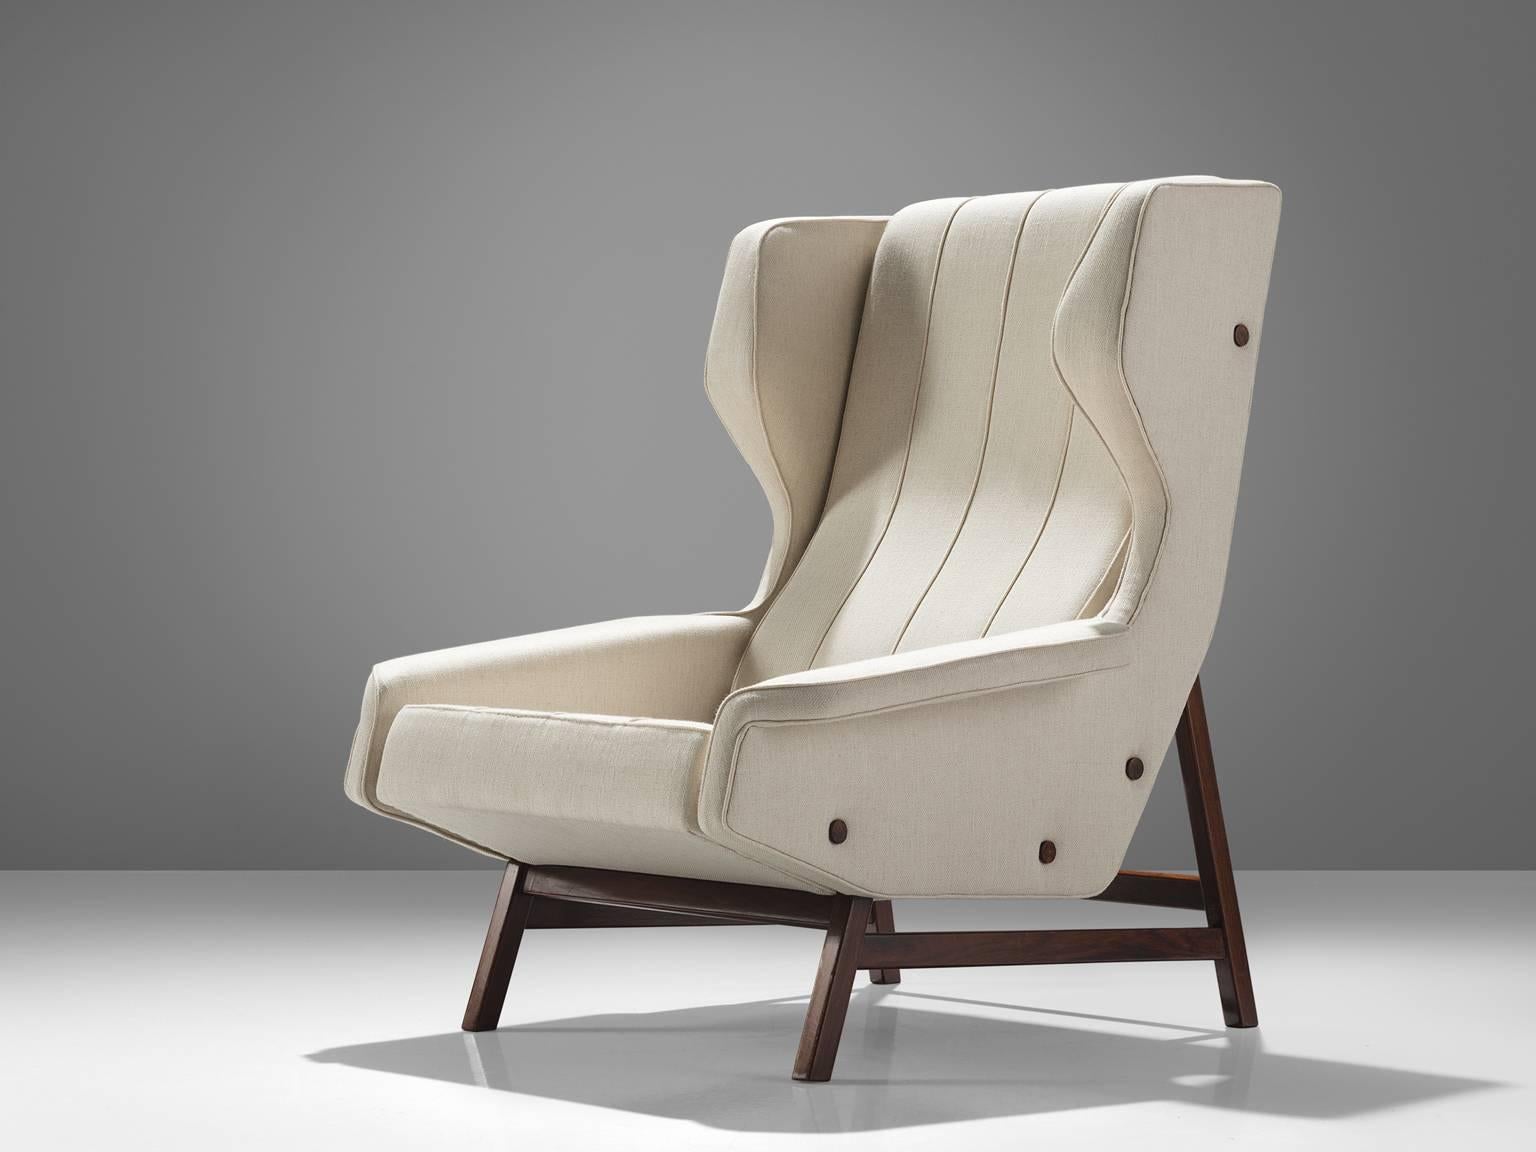 Gianfranco Frattini for Cassina, lounge chair model 877, fabric, rosewood, Italy, 1959.

Sturdy and voluminous lounge chair in white fabric, reupholstered in our in-house workshop. This wingback chair shows nice details and elegant lines. The